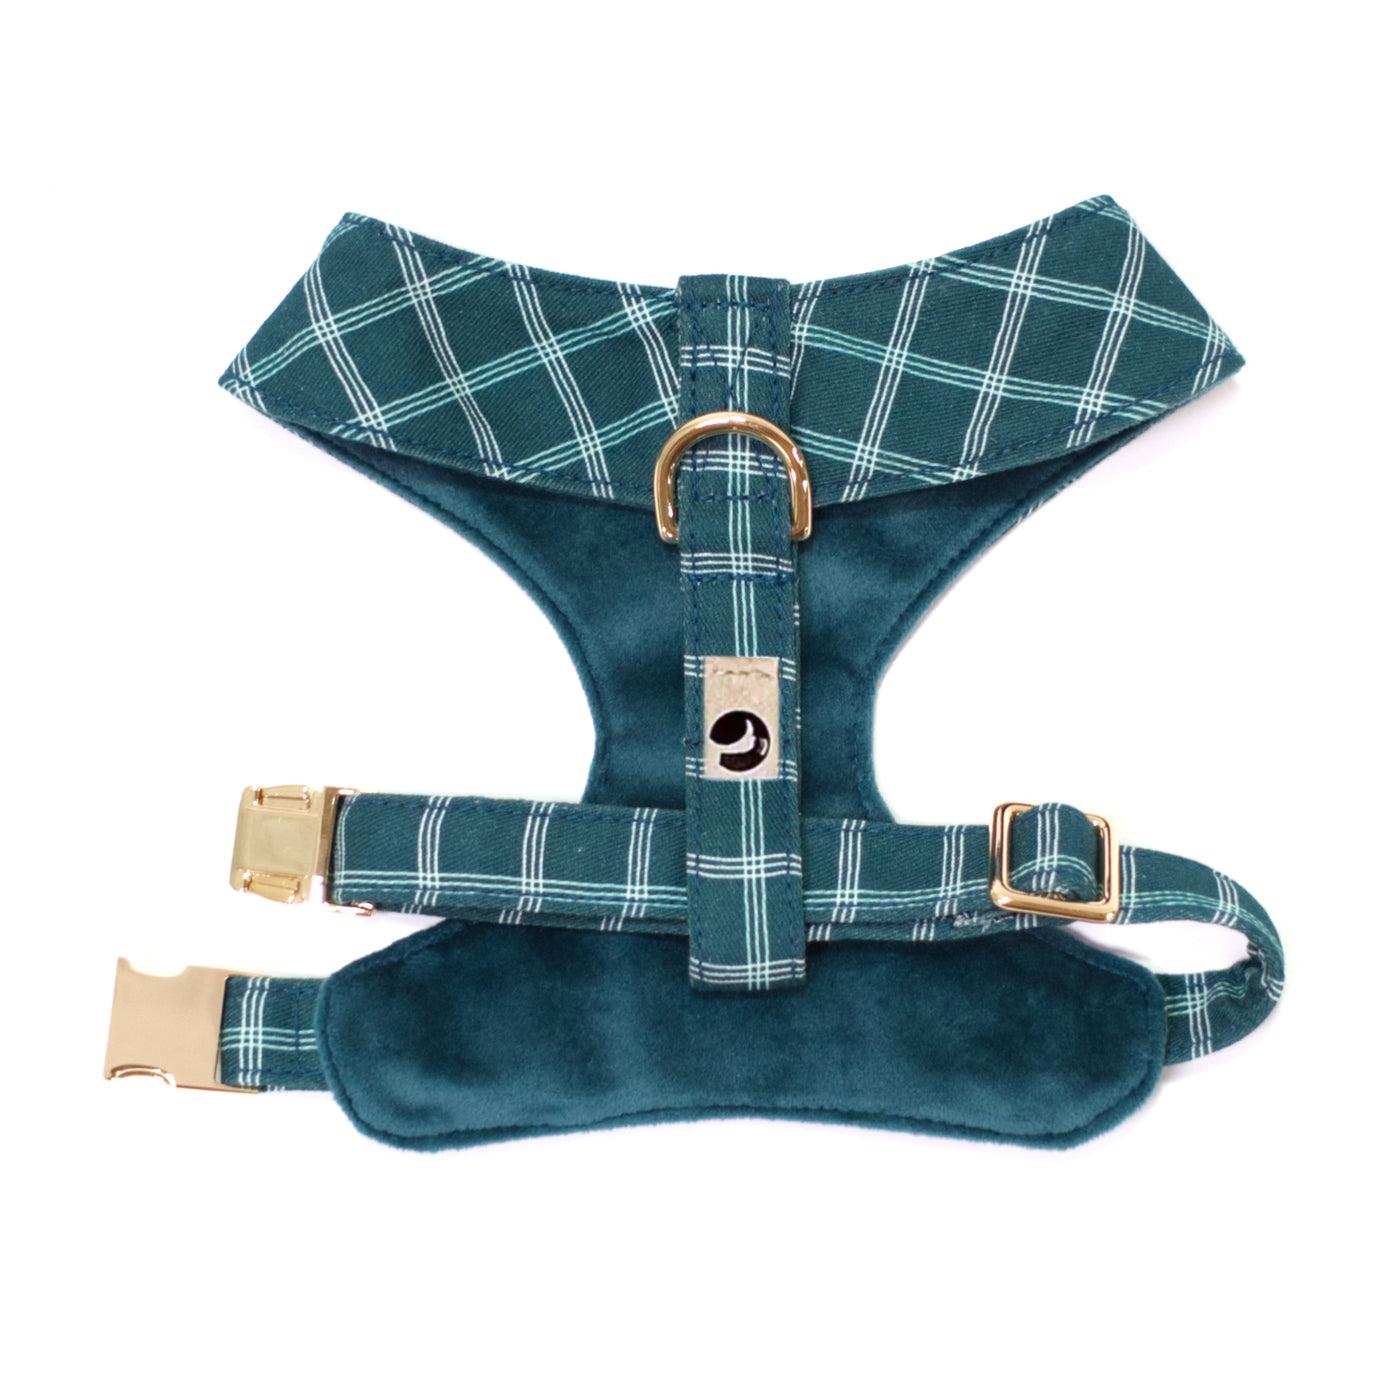 Teal blue reversible windowpane plaid dog harness in size XS